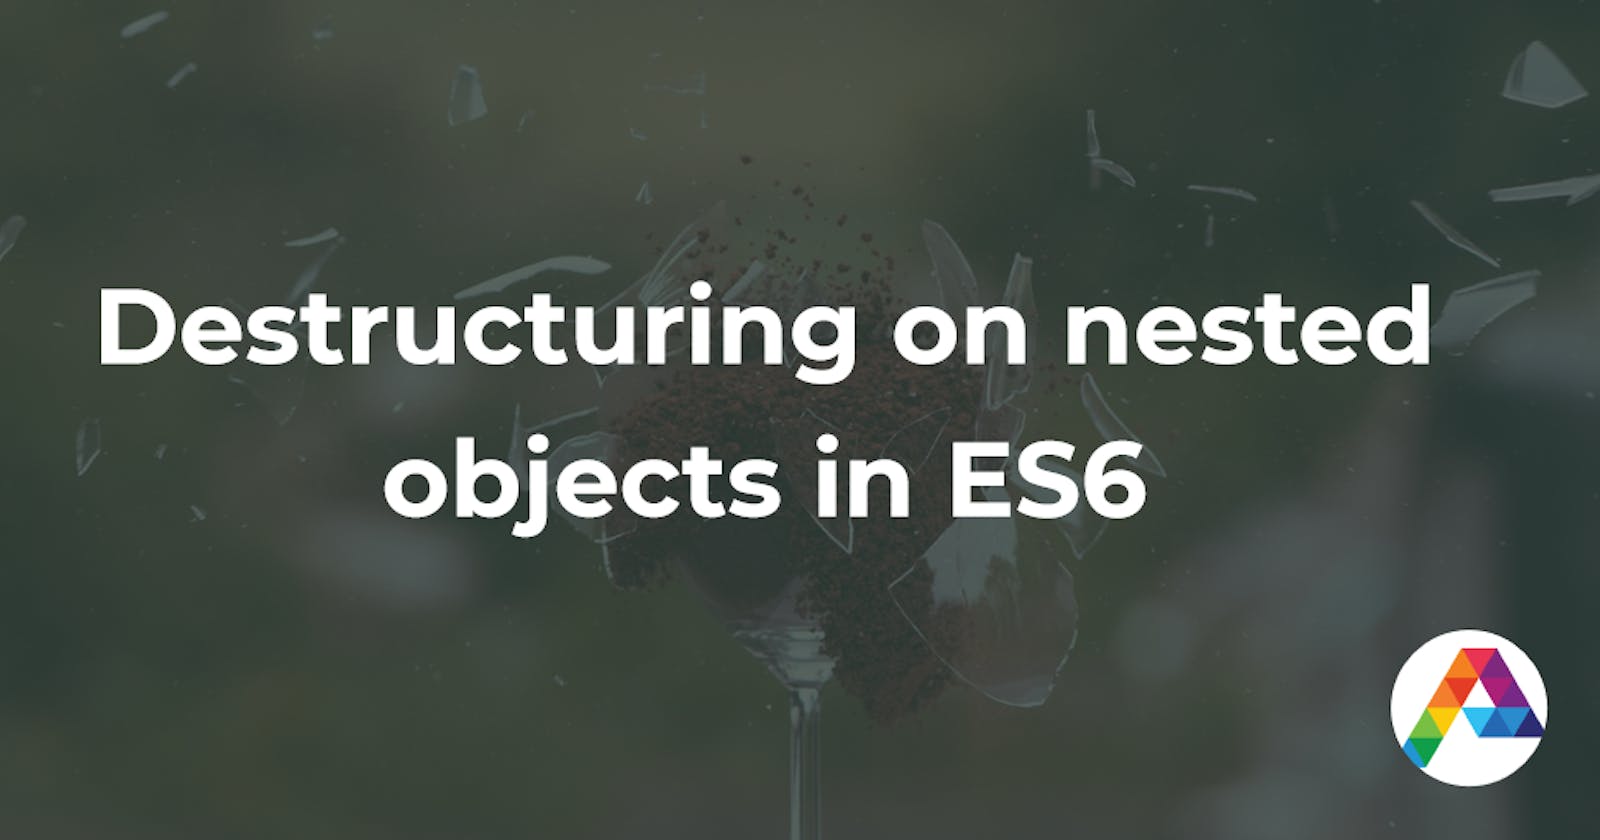 Destructuring on nested objects in ES6